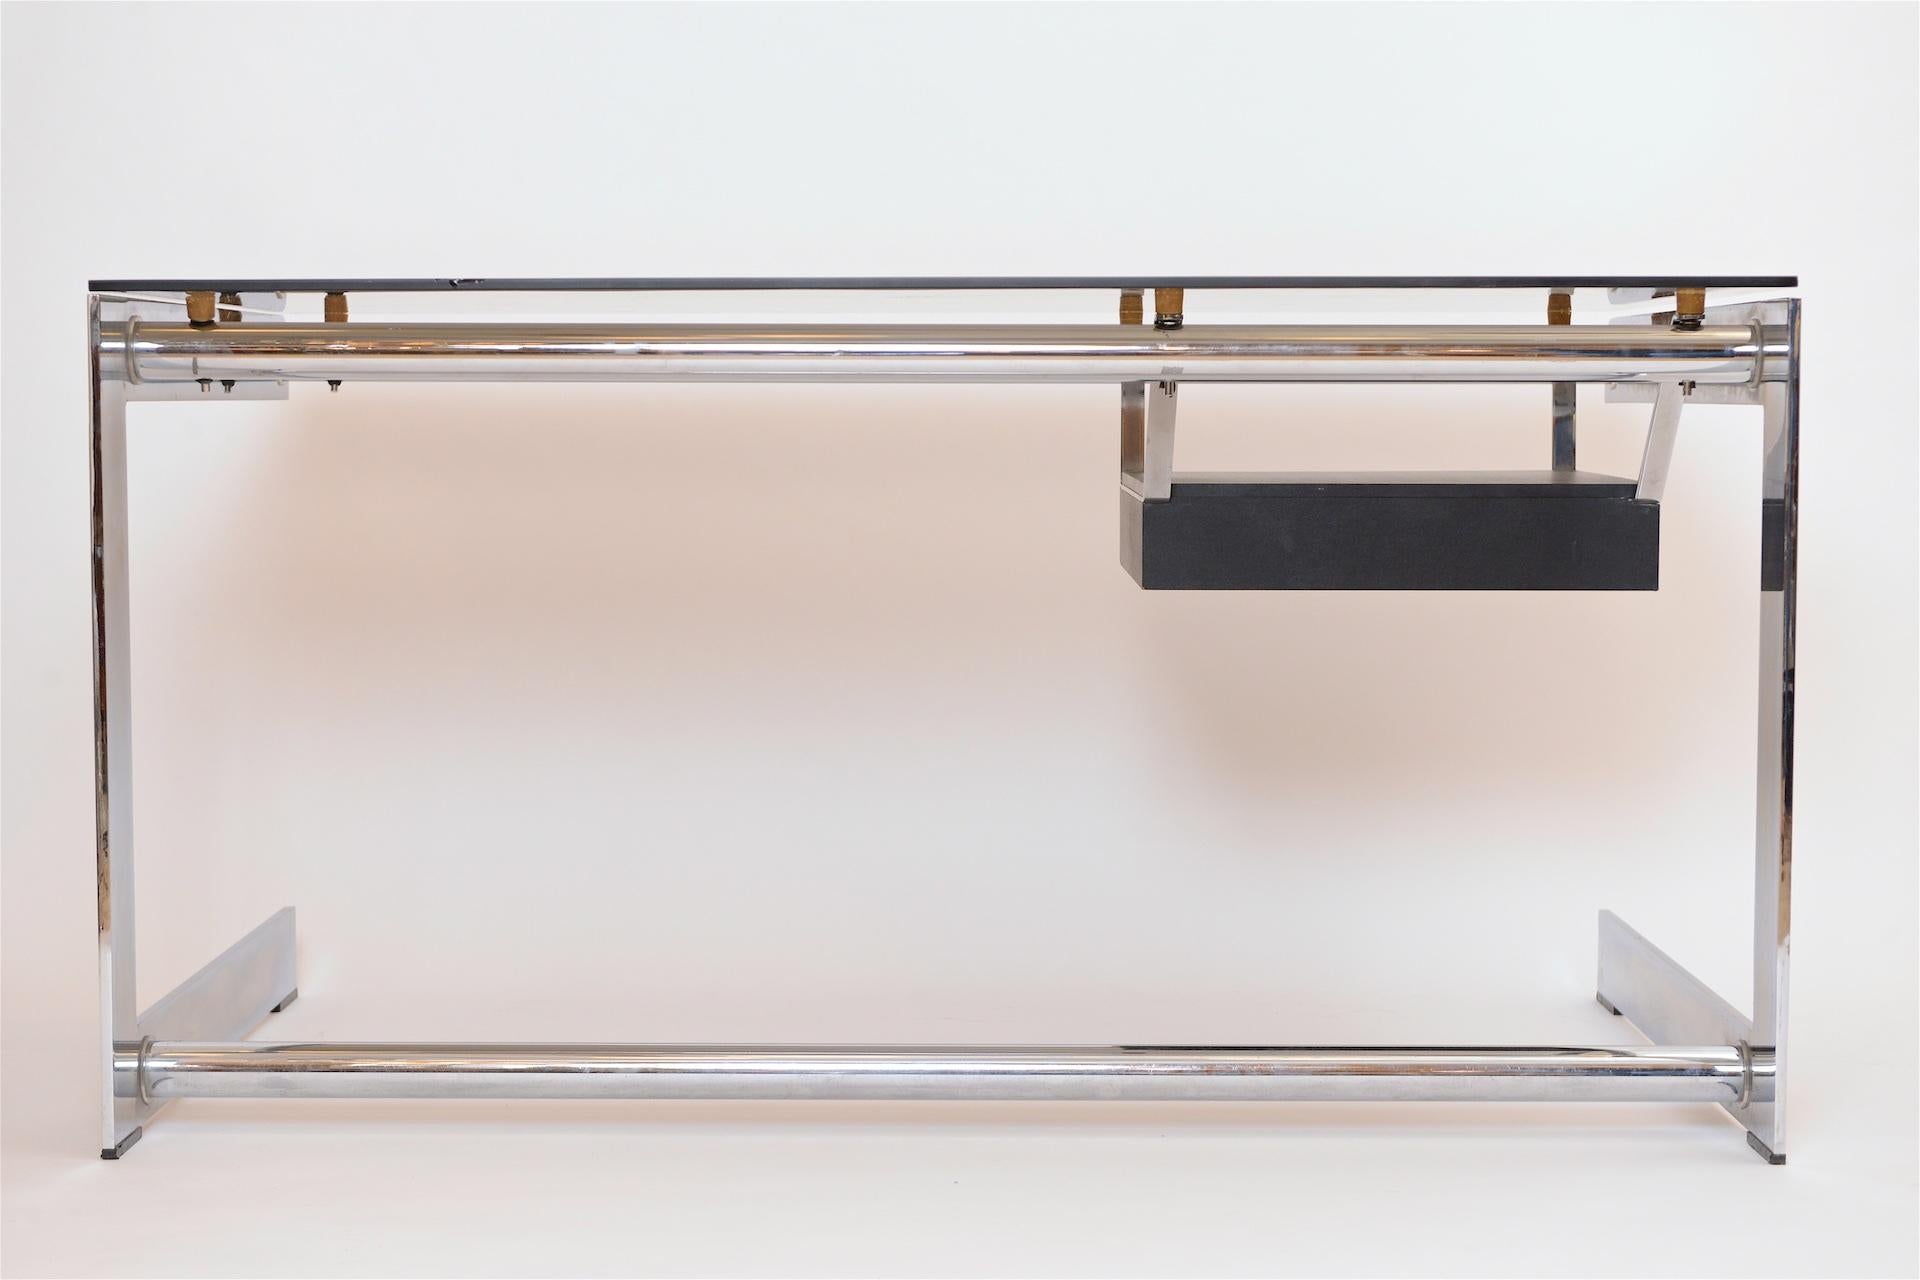 Mid-20th Century Rare Chrome and Glass Desk by Gilles Bouchez for Airbourne, circa 1965